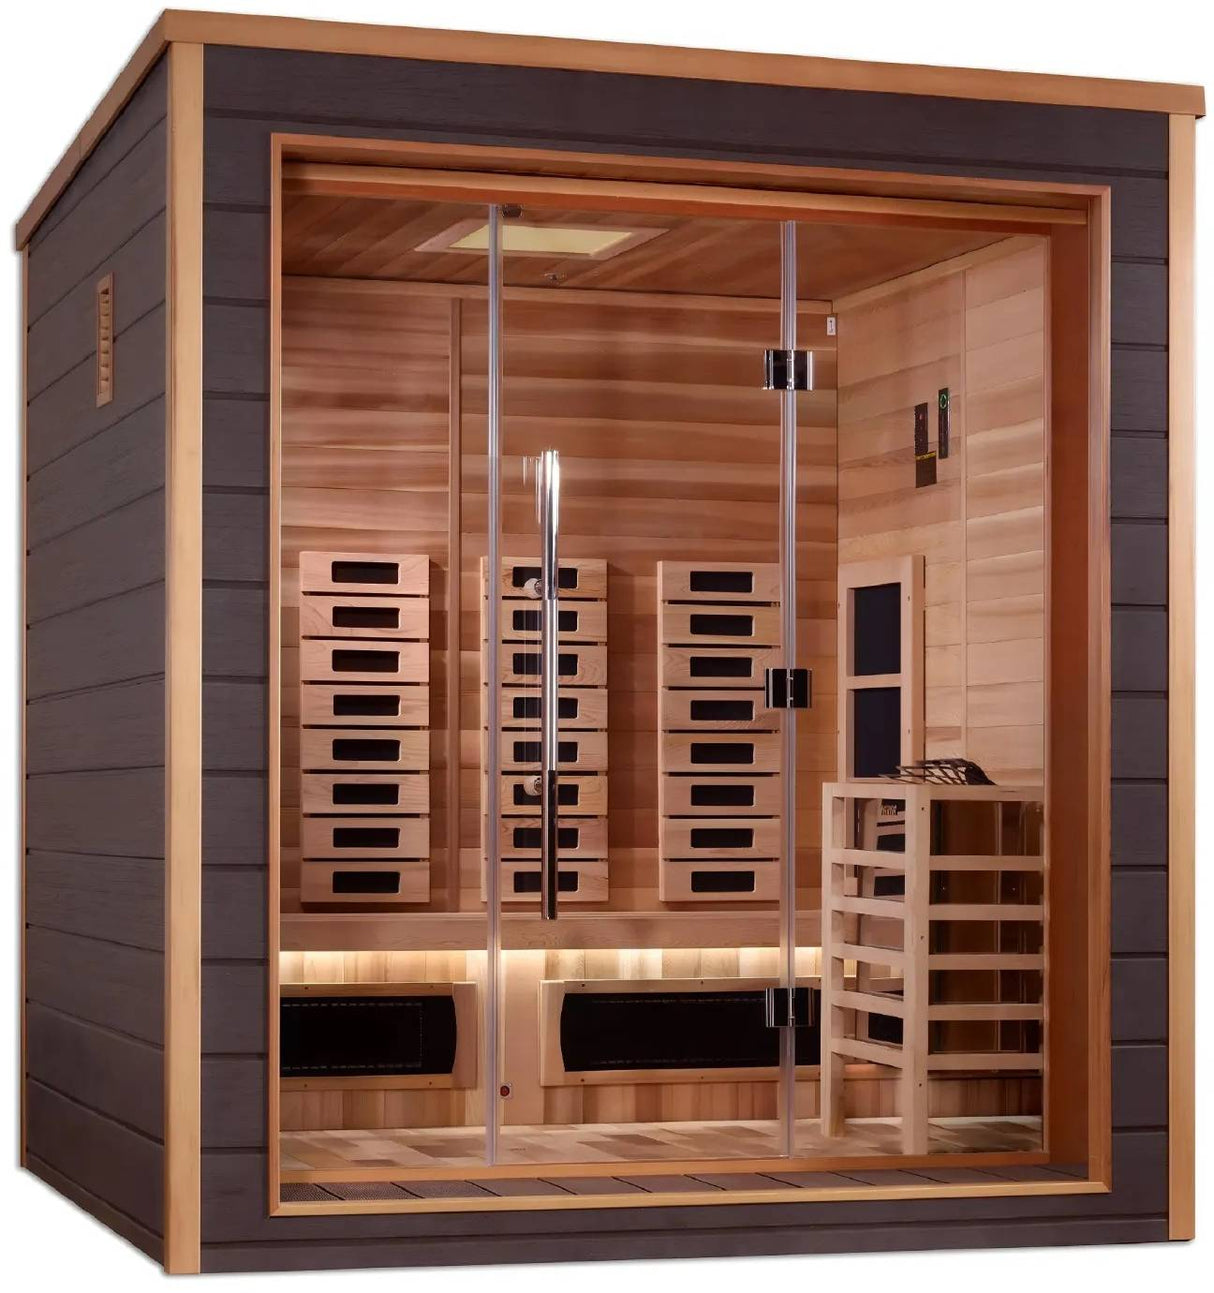 ZiahCare's Golden Designs Visby 3 Person Hybrid Sauna Mockup Image 3